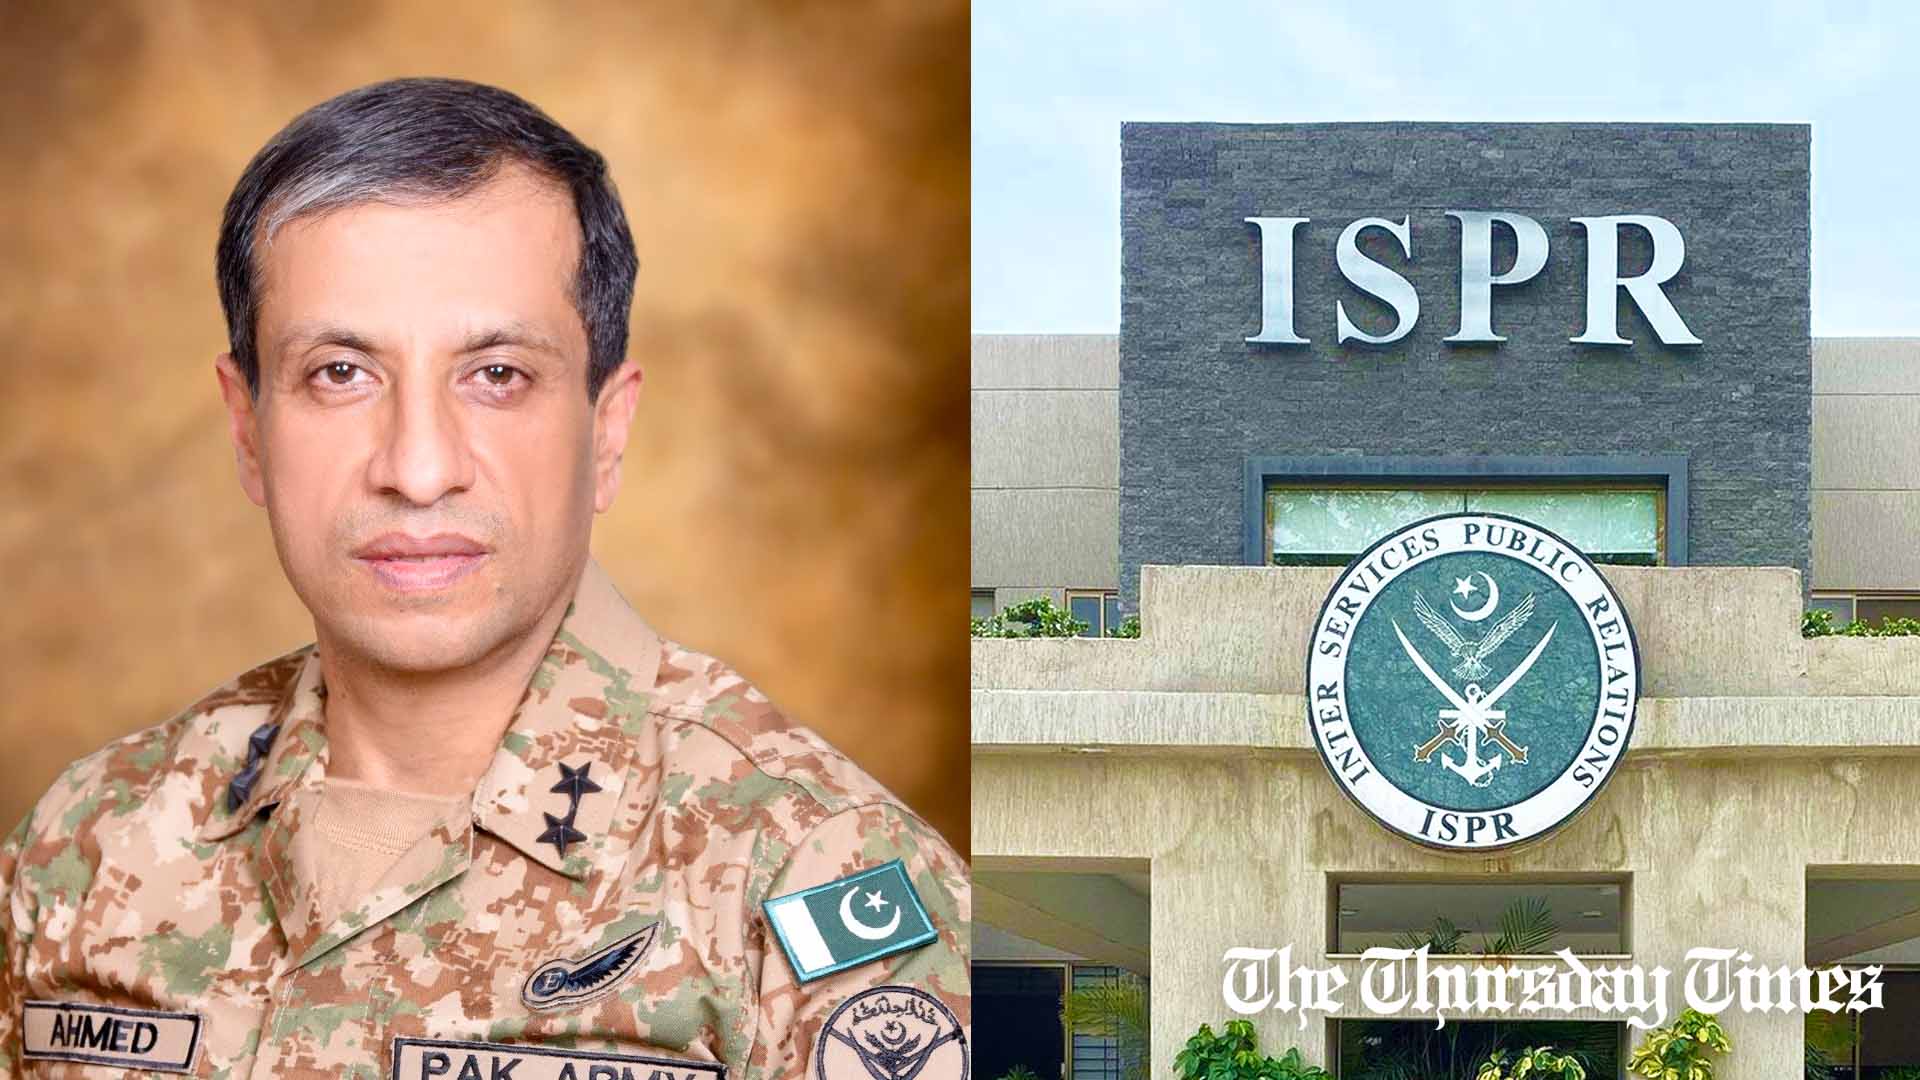 A combination file photo is shown of Director-General ISPR Maj Gen Ahmed Sharif alongside the ISPR headquarters at Rawalpindi. — FILE/ISPR/THE THURSDAY TIMES